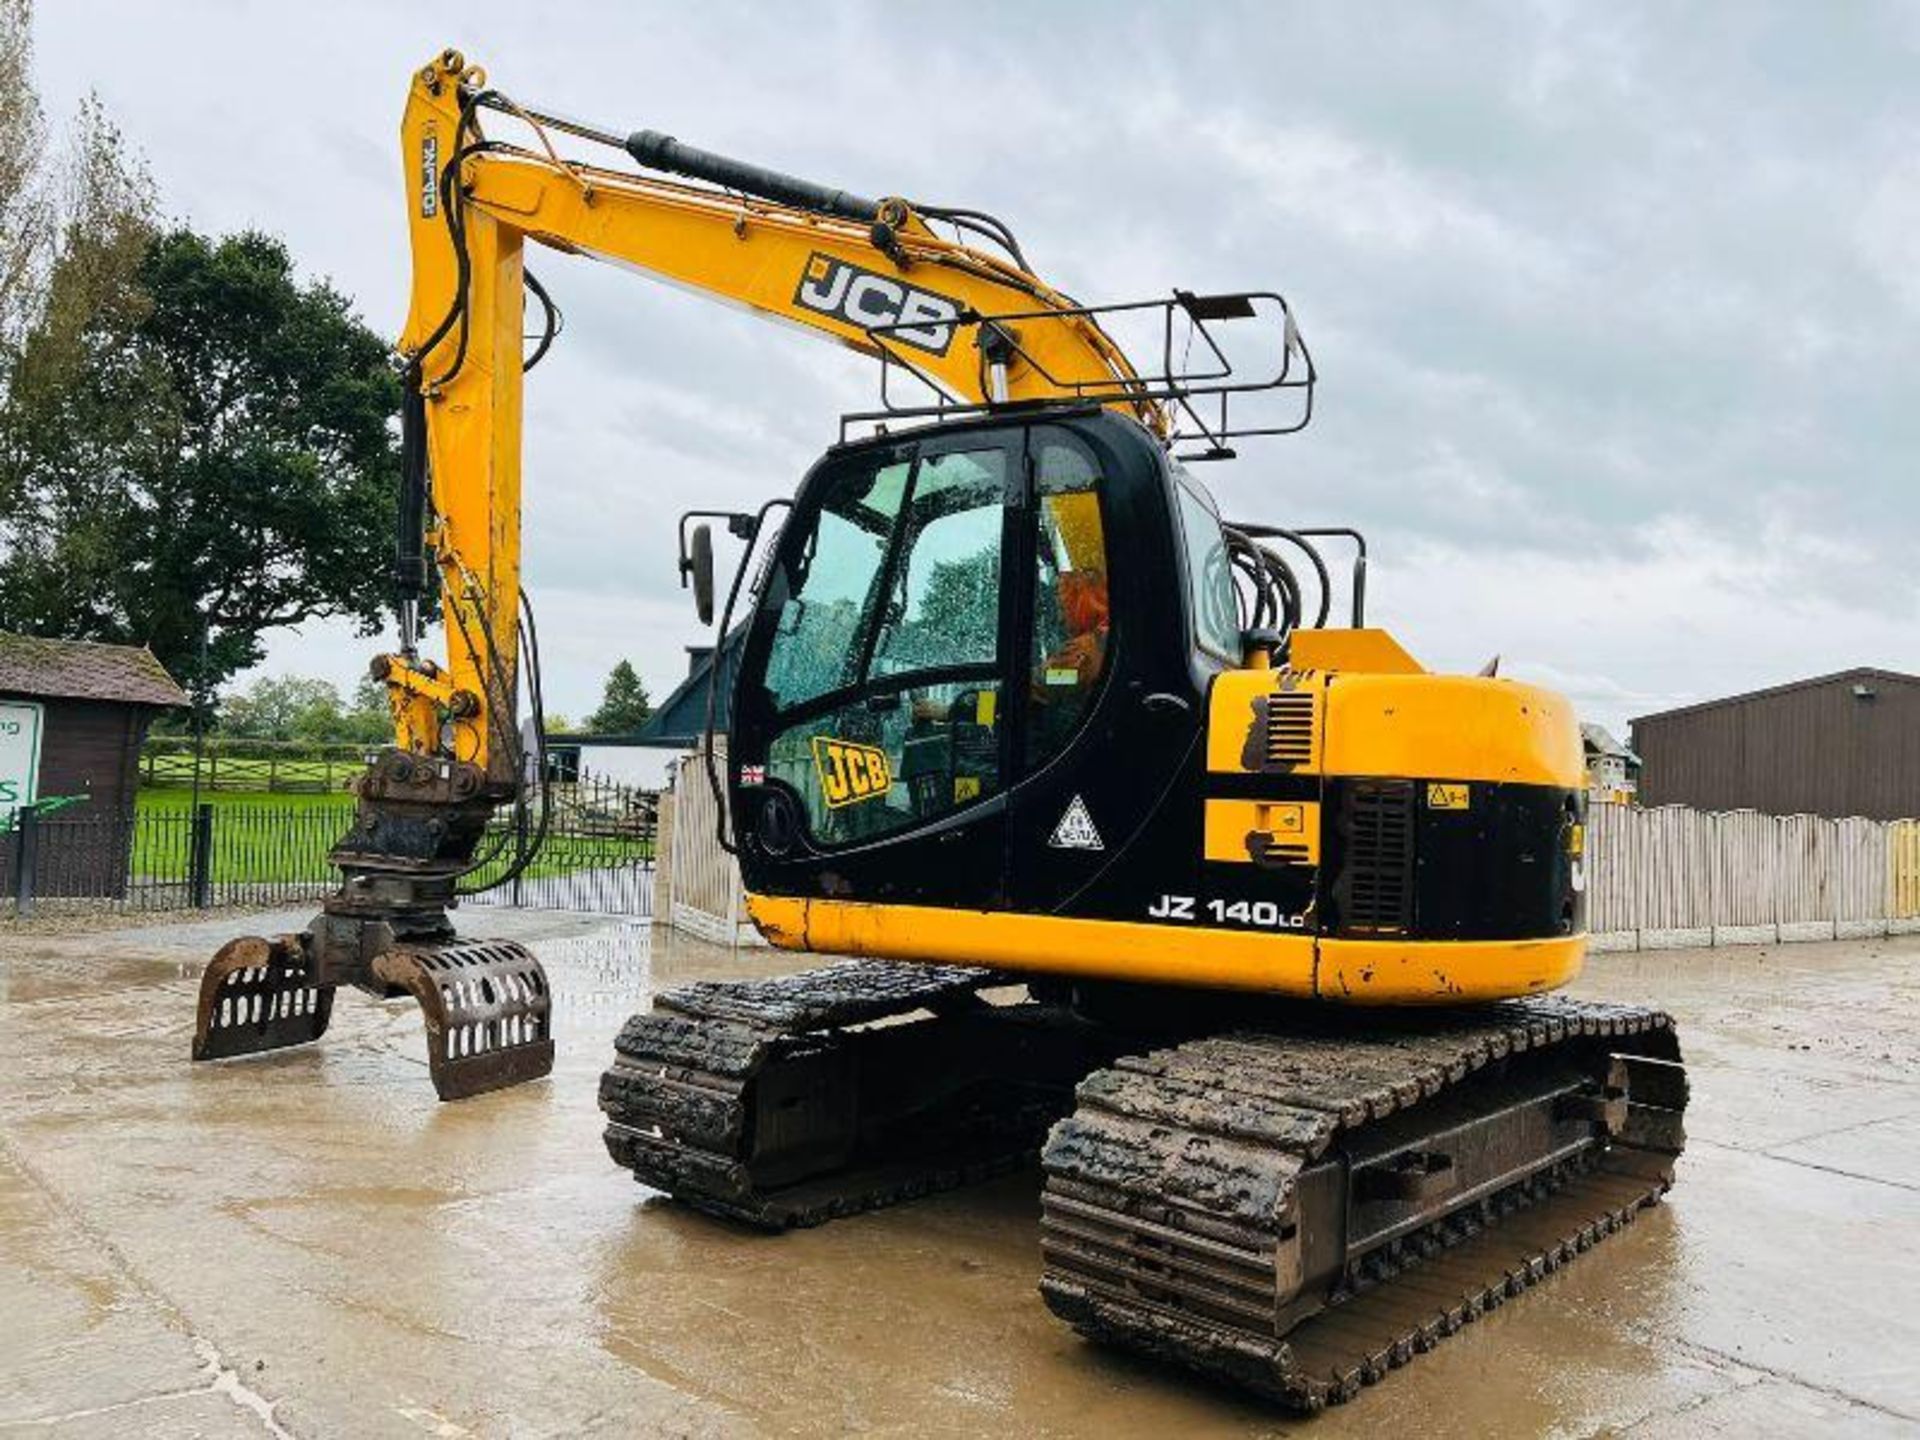 JCB JZ140 TRACKED EXCAVATOR *ZERO SWING* C/W QUICK HITCH & ROTATING SELECTOR GRAB. - Image 10 of 15